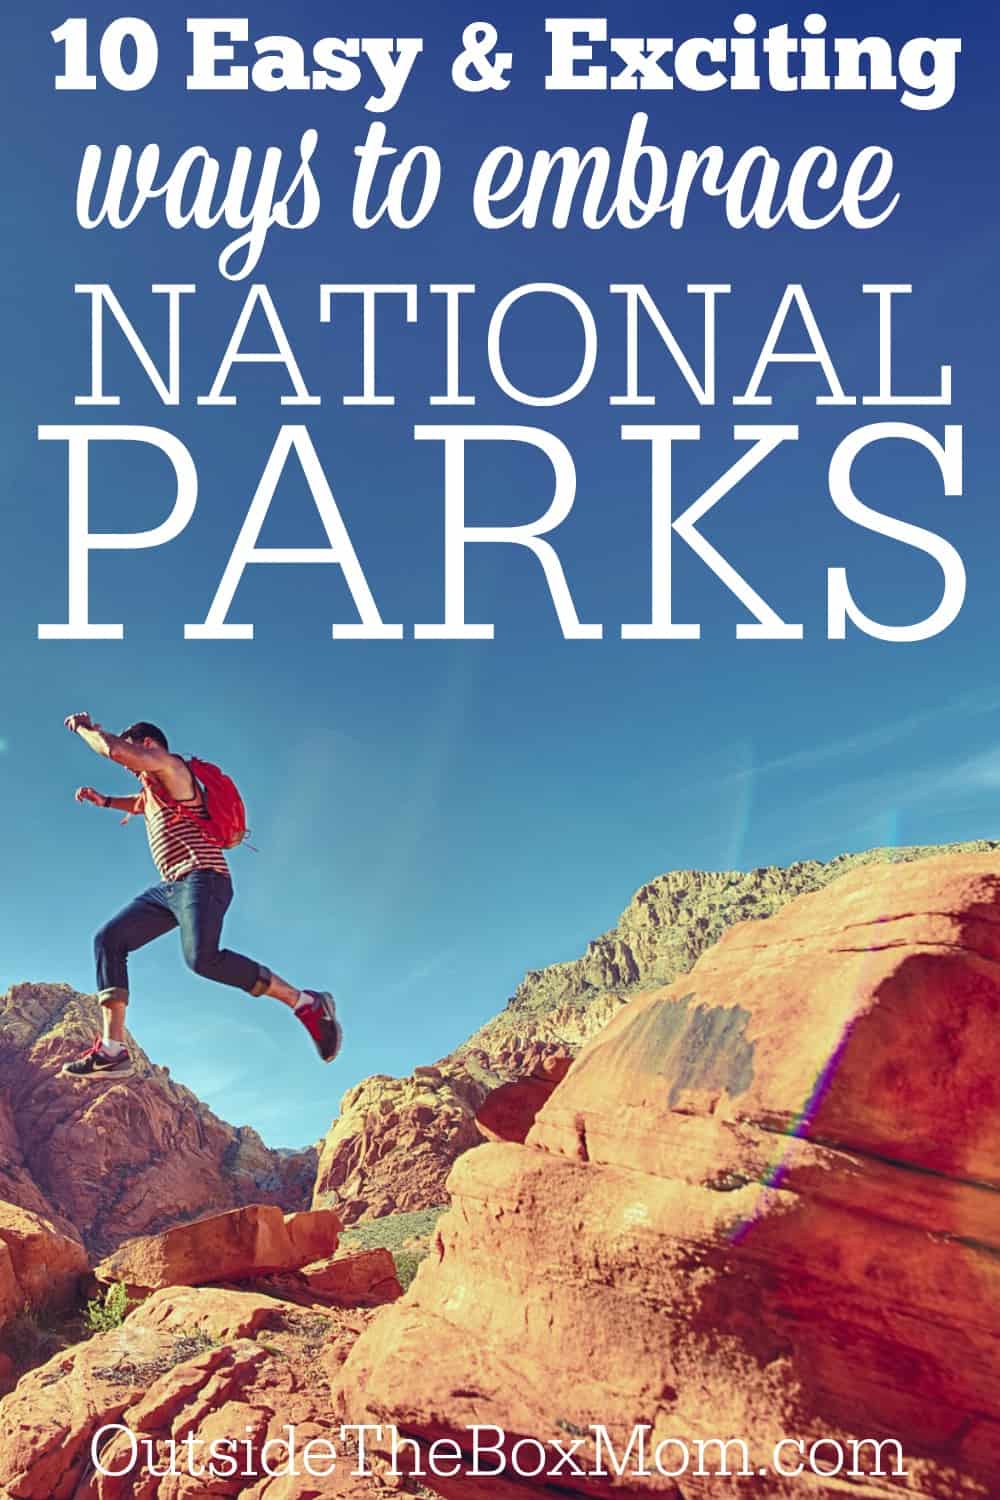 Are you looking for an outdoor adventure for your family this summer? Learn why outdoor enthusiasts and nature amateurs alike should embrace the opportunity to explore, learn, be inspired, or simply have fun in any of America’s national parks.